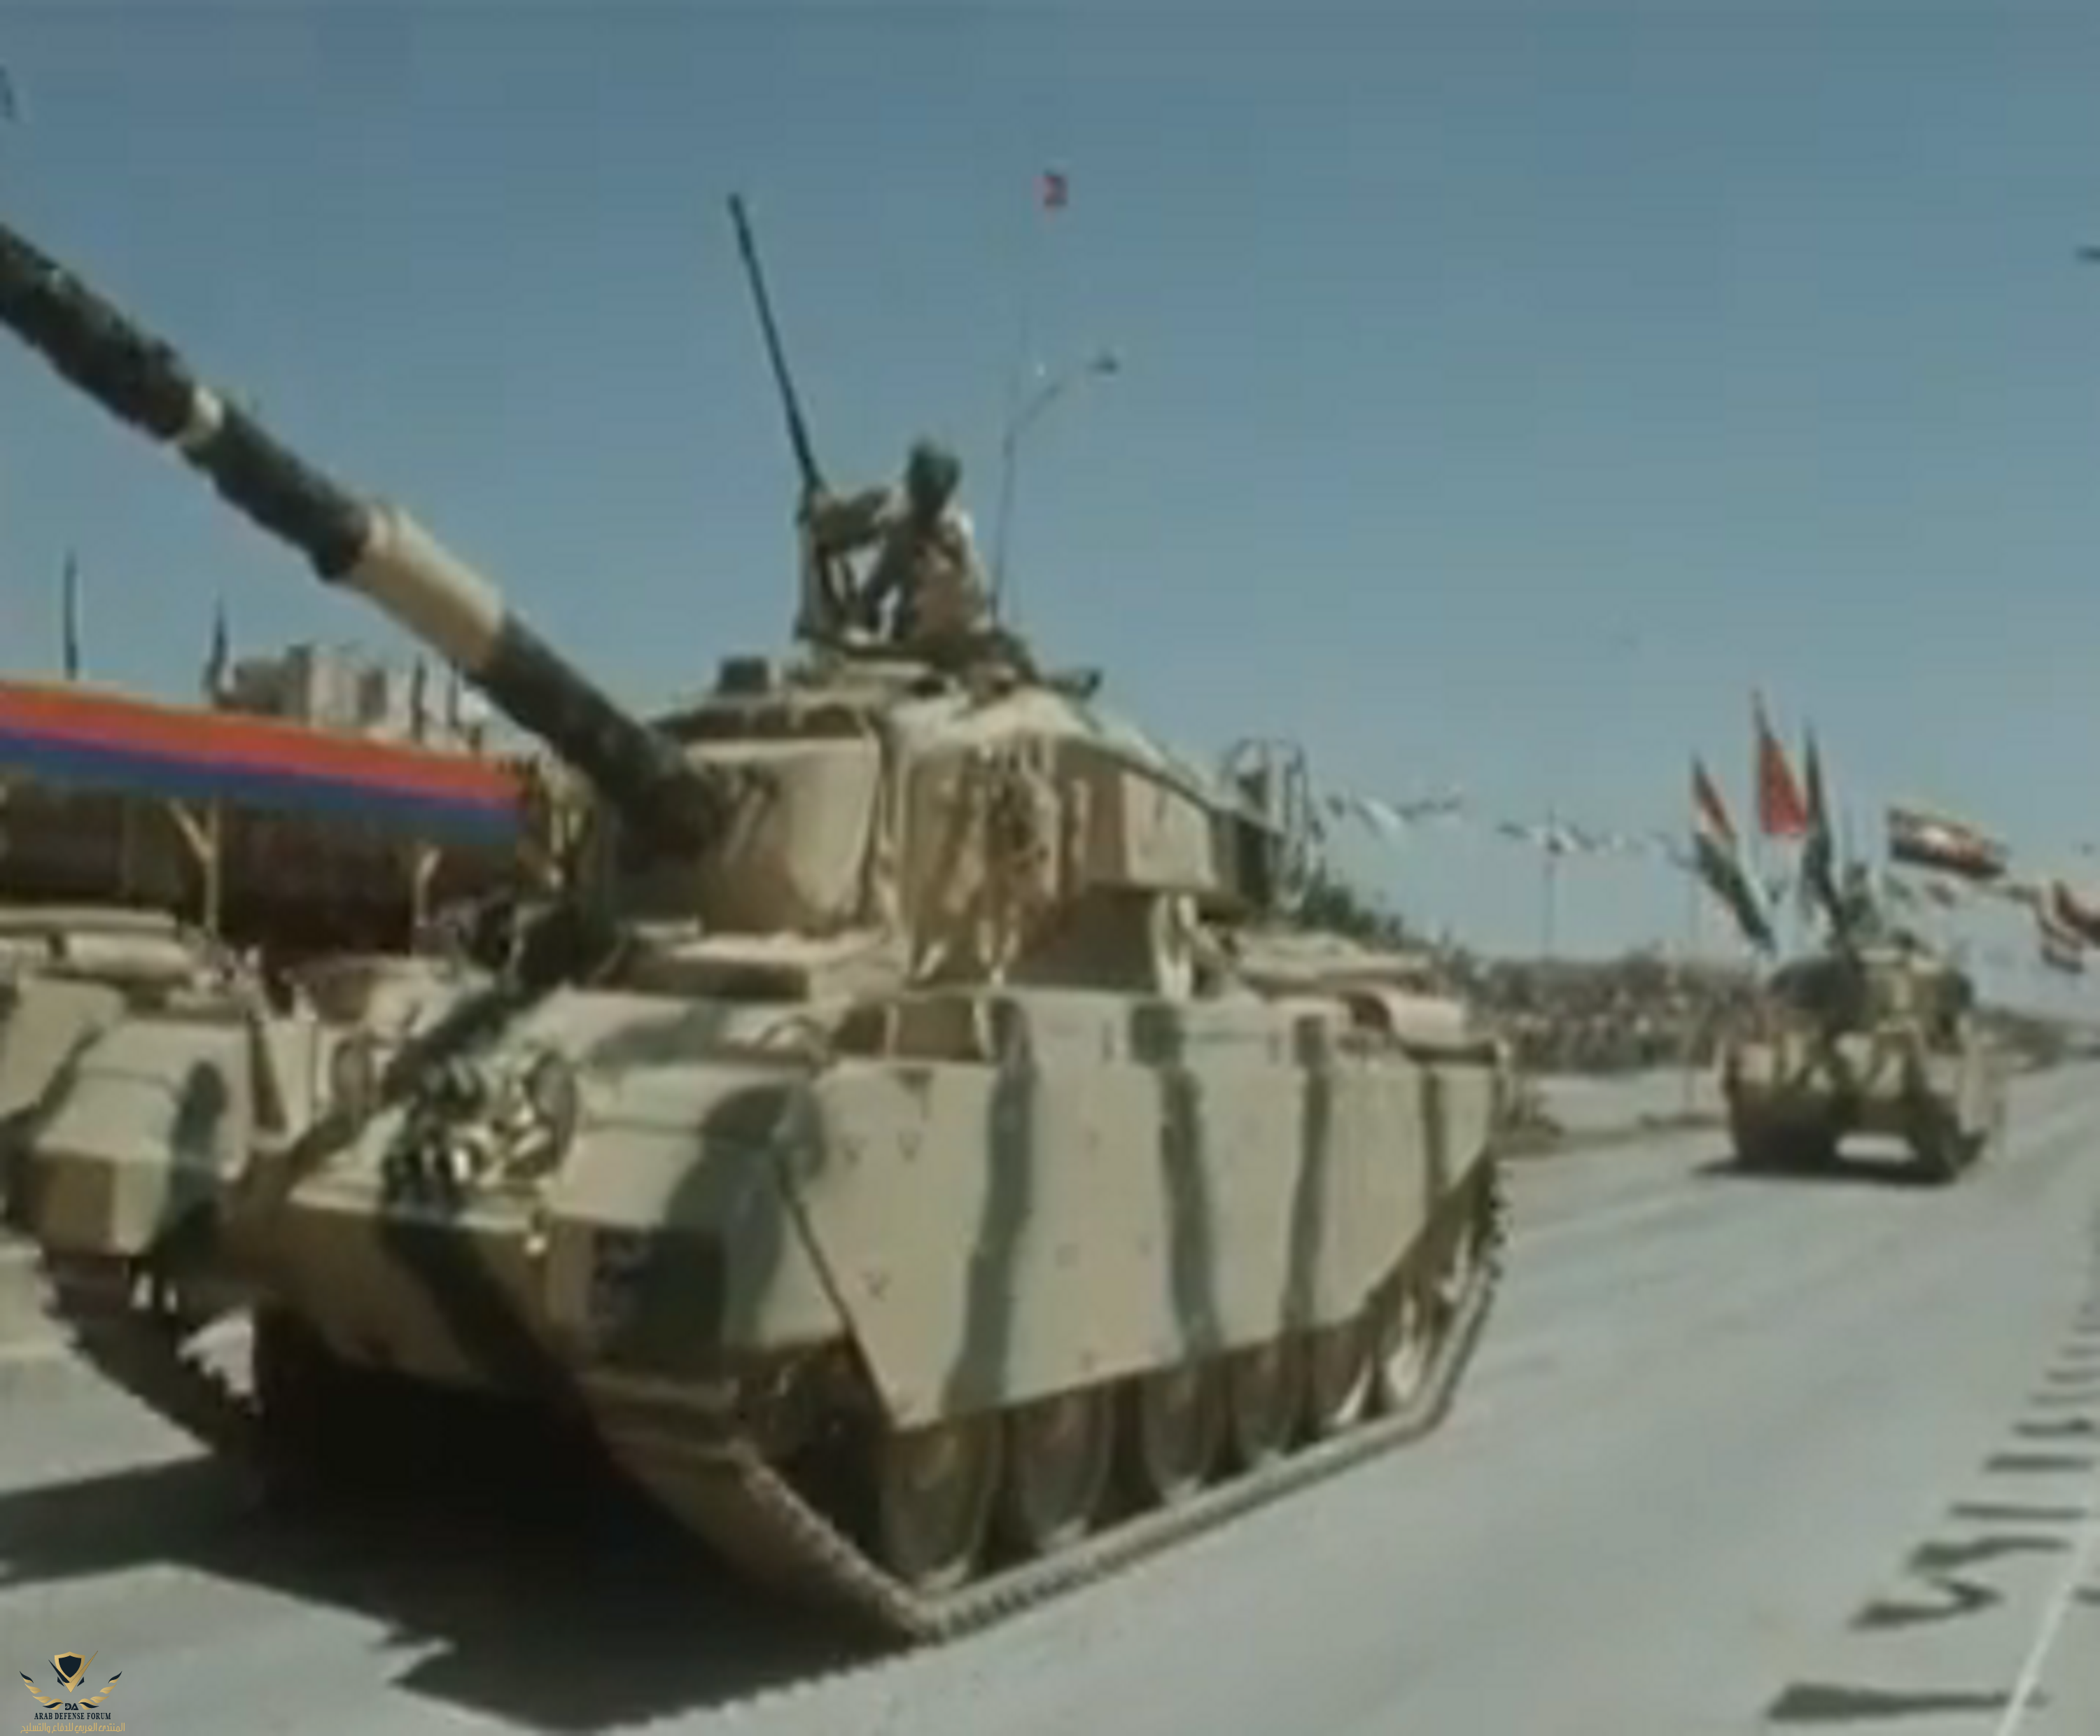 SYND 260571 A MILITARY PARADE IN AMMAN - YouTube.png